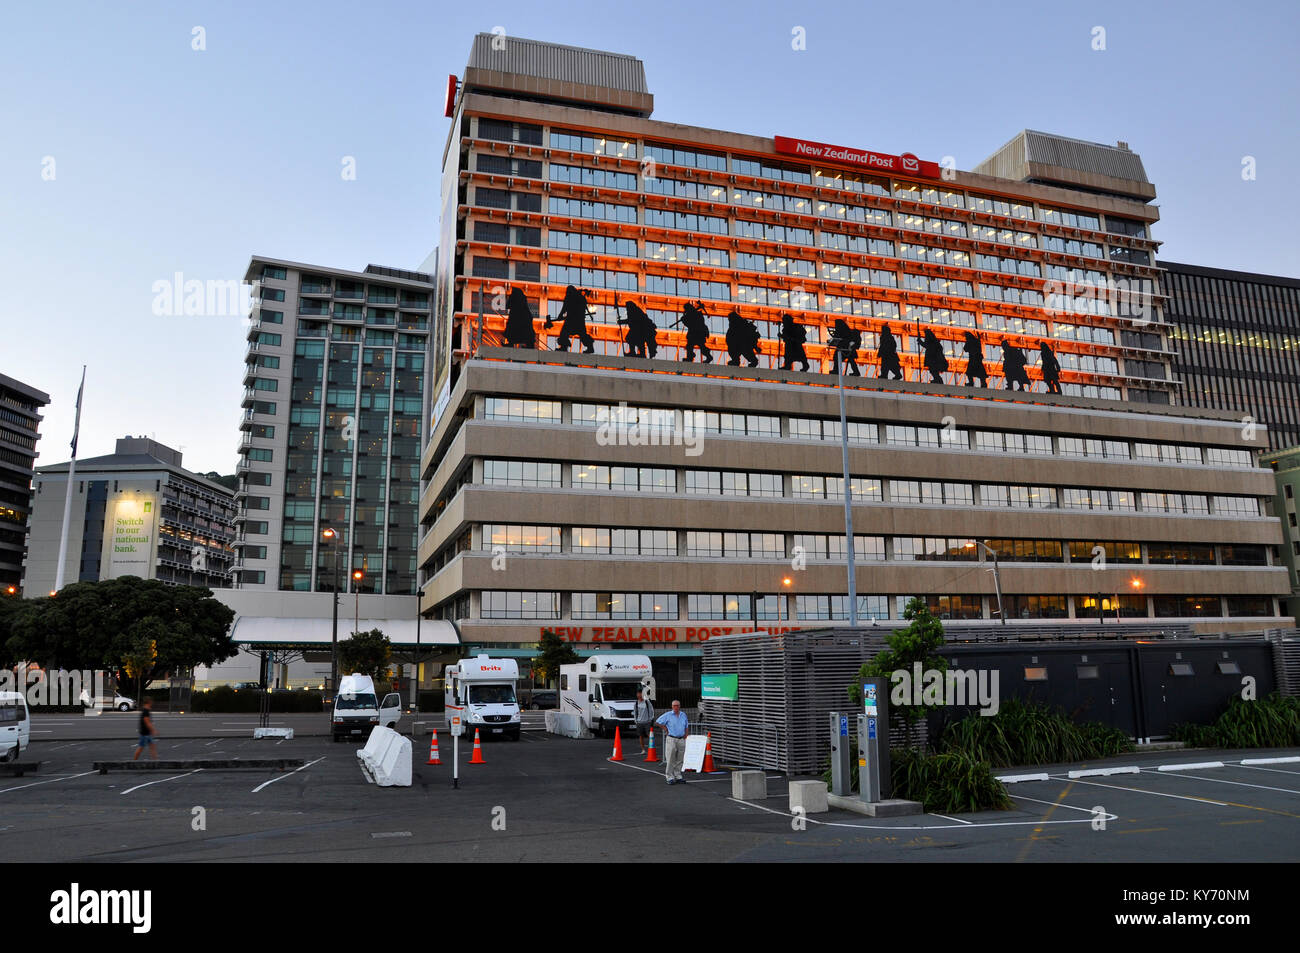 New Zealand Post House. Wellington Ferry Terminal Quay area, South Island, NZ, with The Hobbit character silhouettes Stock Photo